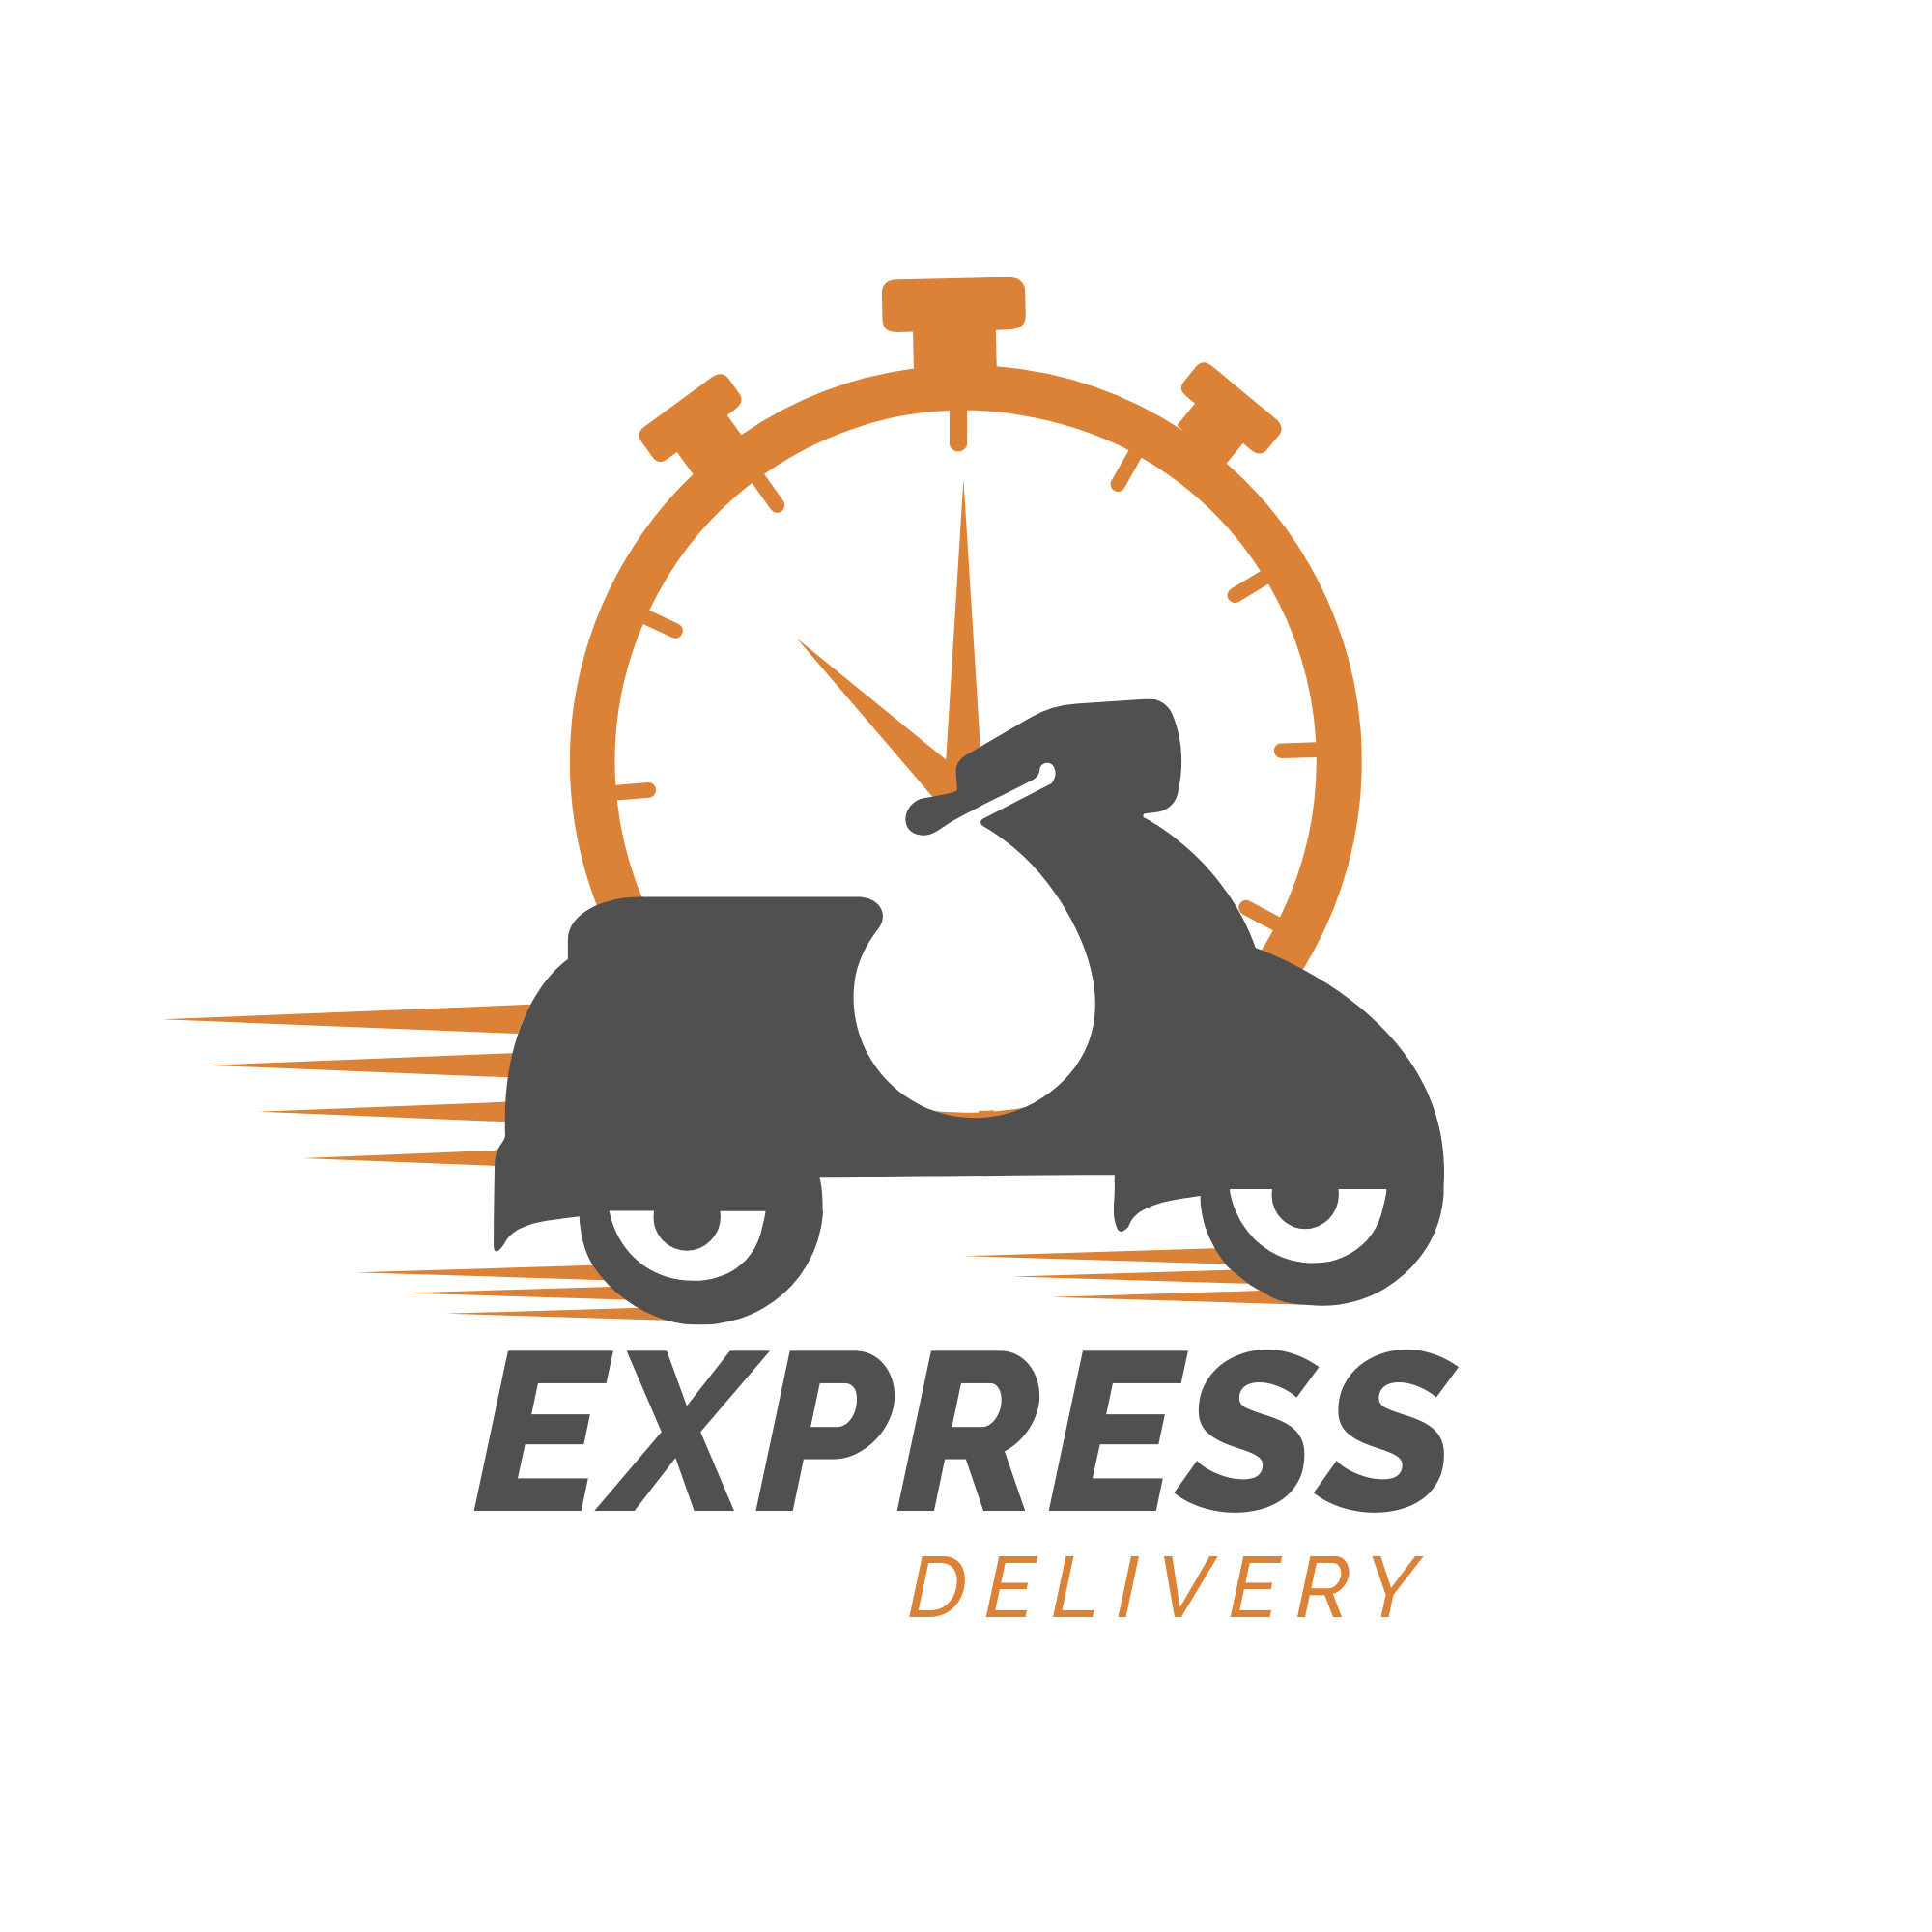 Express Delivery: Fast and Reliable Shipping for Your Orders